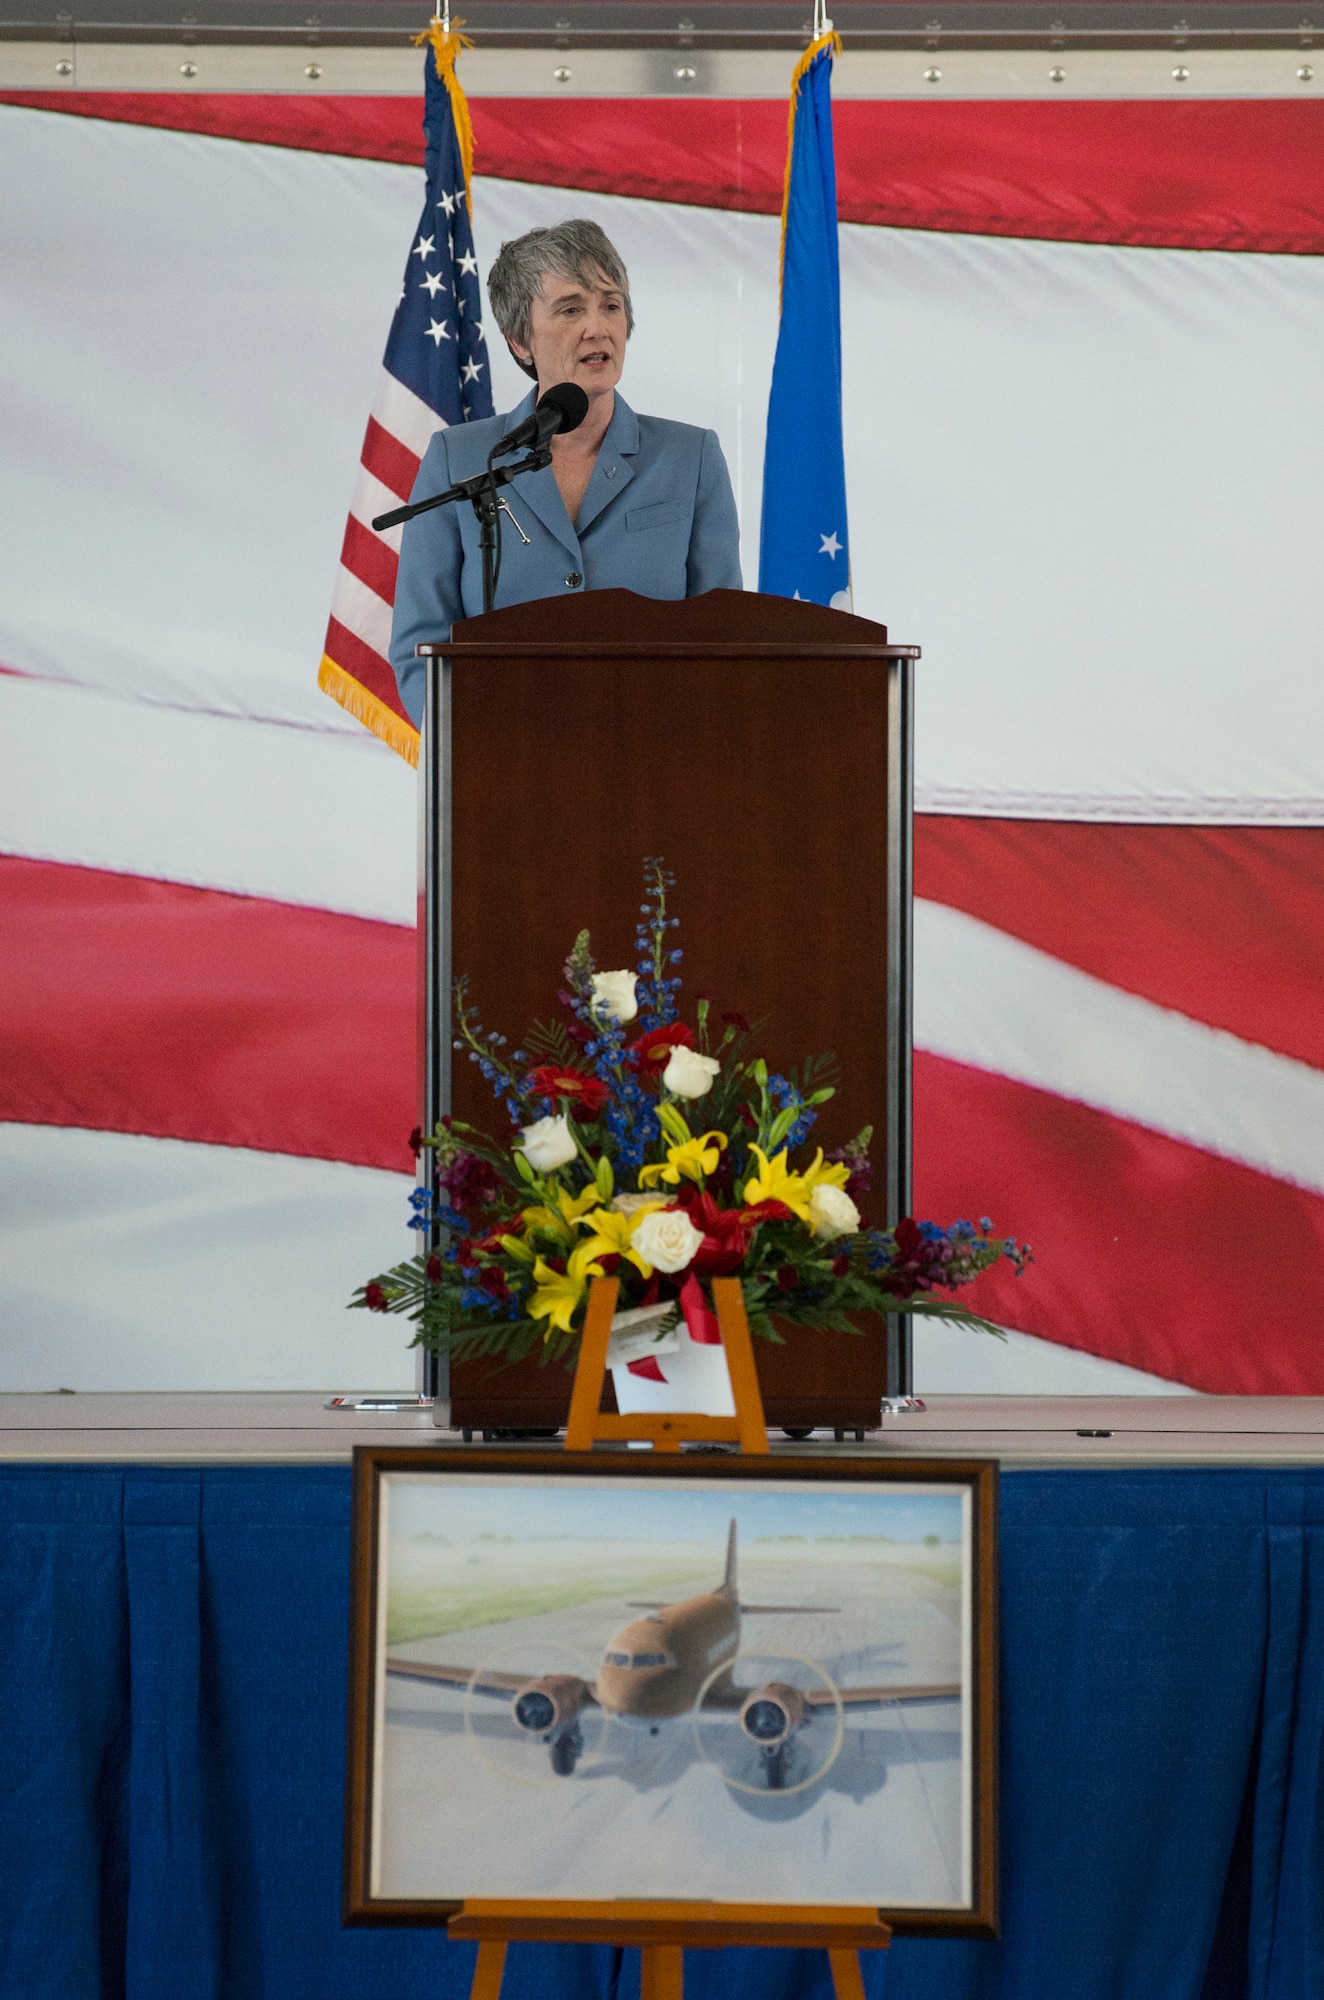 Secretary of the Air Force Heather Wilson speaks to attendees at the memorial service to celebrate the life of retired U.S. Air Force Lt. Col. Richard “Dick” E. Cole at Joint Base San Antonio-Randolph, Texas, April 18, 2019.